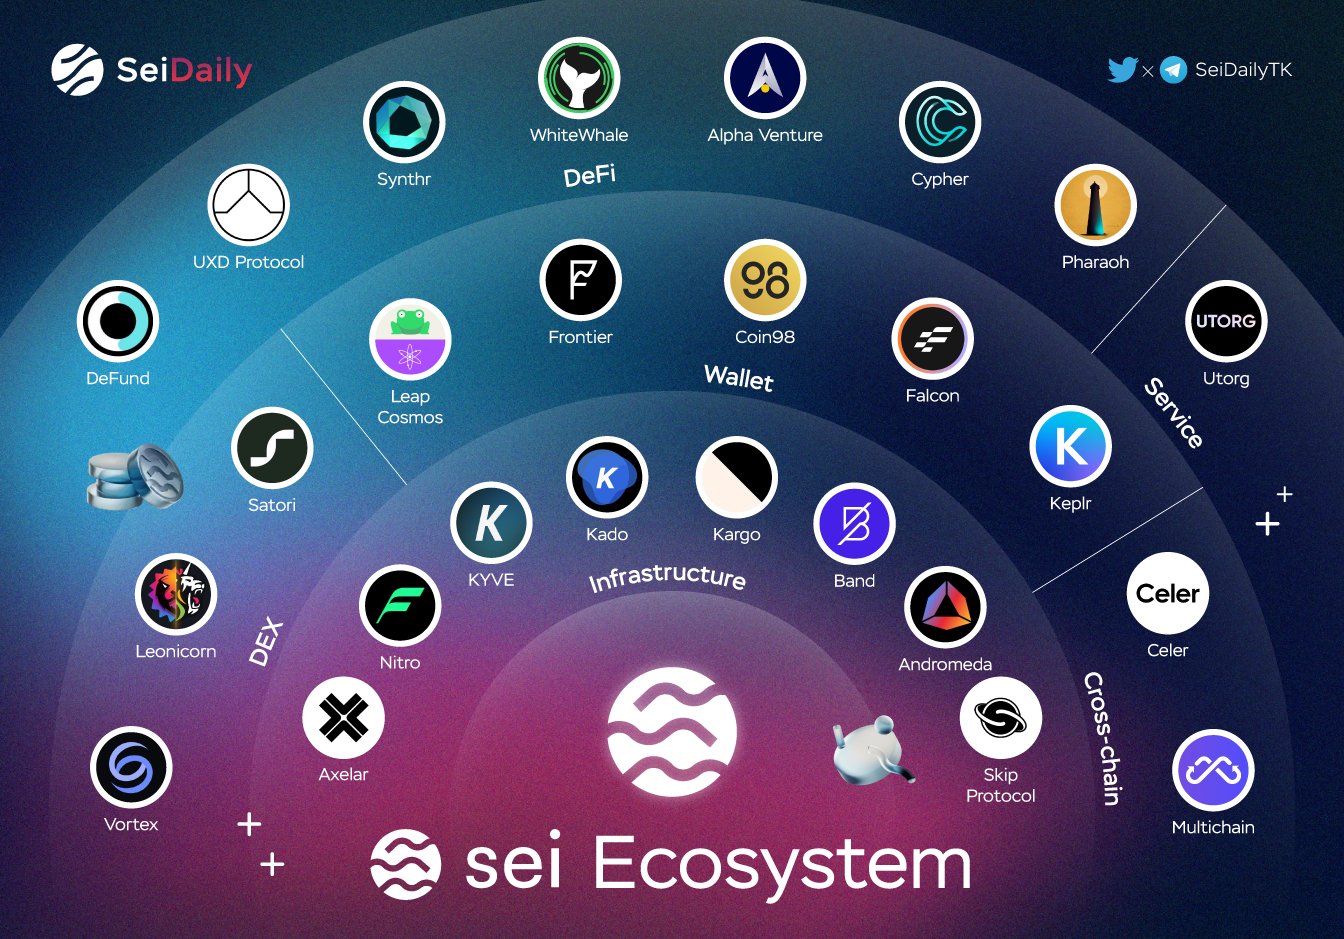 Sei Daily on X: "Sei Ecosystem Landscape Here is the latest updated  @SeiNetwork Ecosystem Landscape 🎉 Despite being a newcomer, Sei is  thriving & growing constantly with new projects & partnerships every